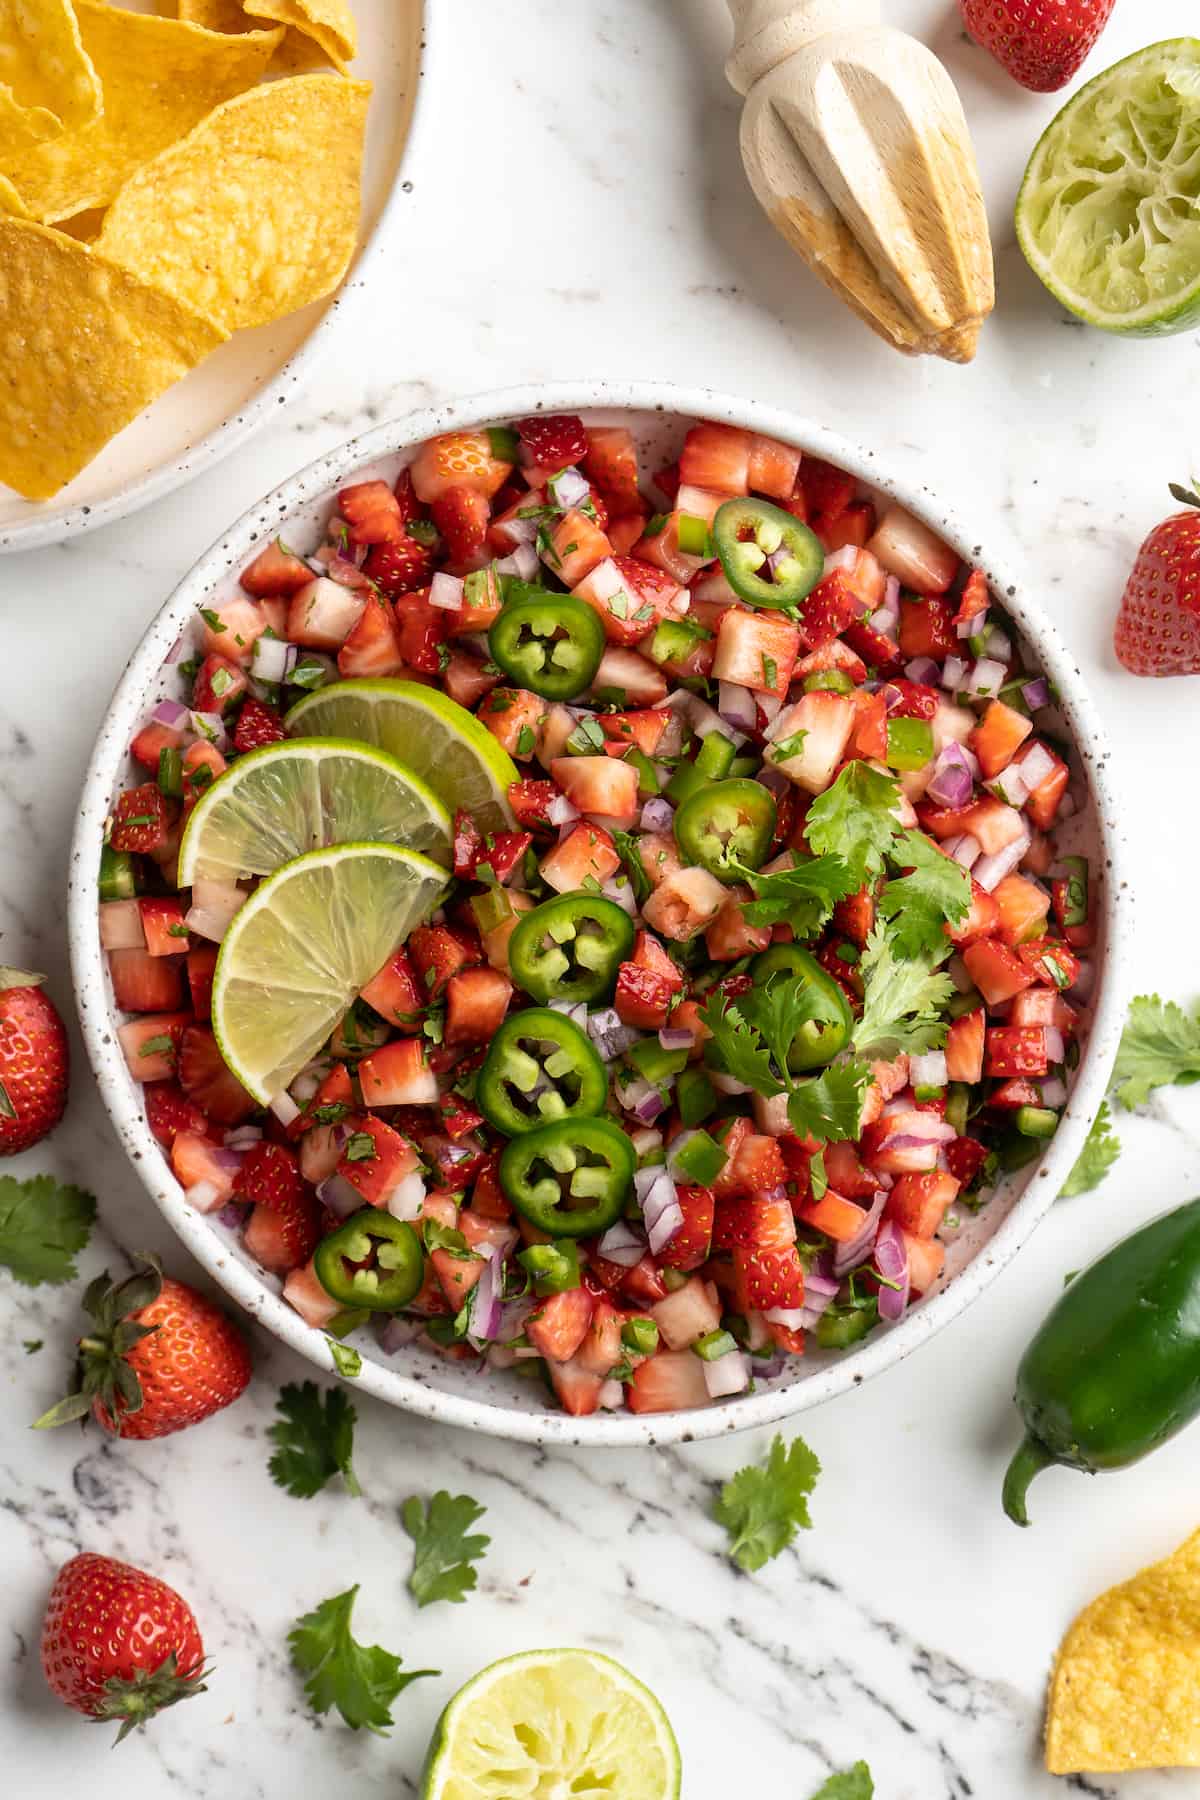 Overhead view of strawberry salsa in bowl, surrounded by strawberries, lime, peppers, and cilantro on marble countertop